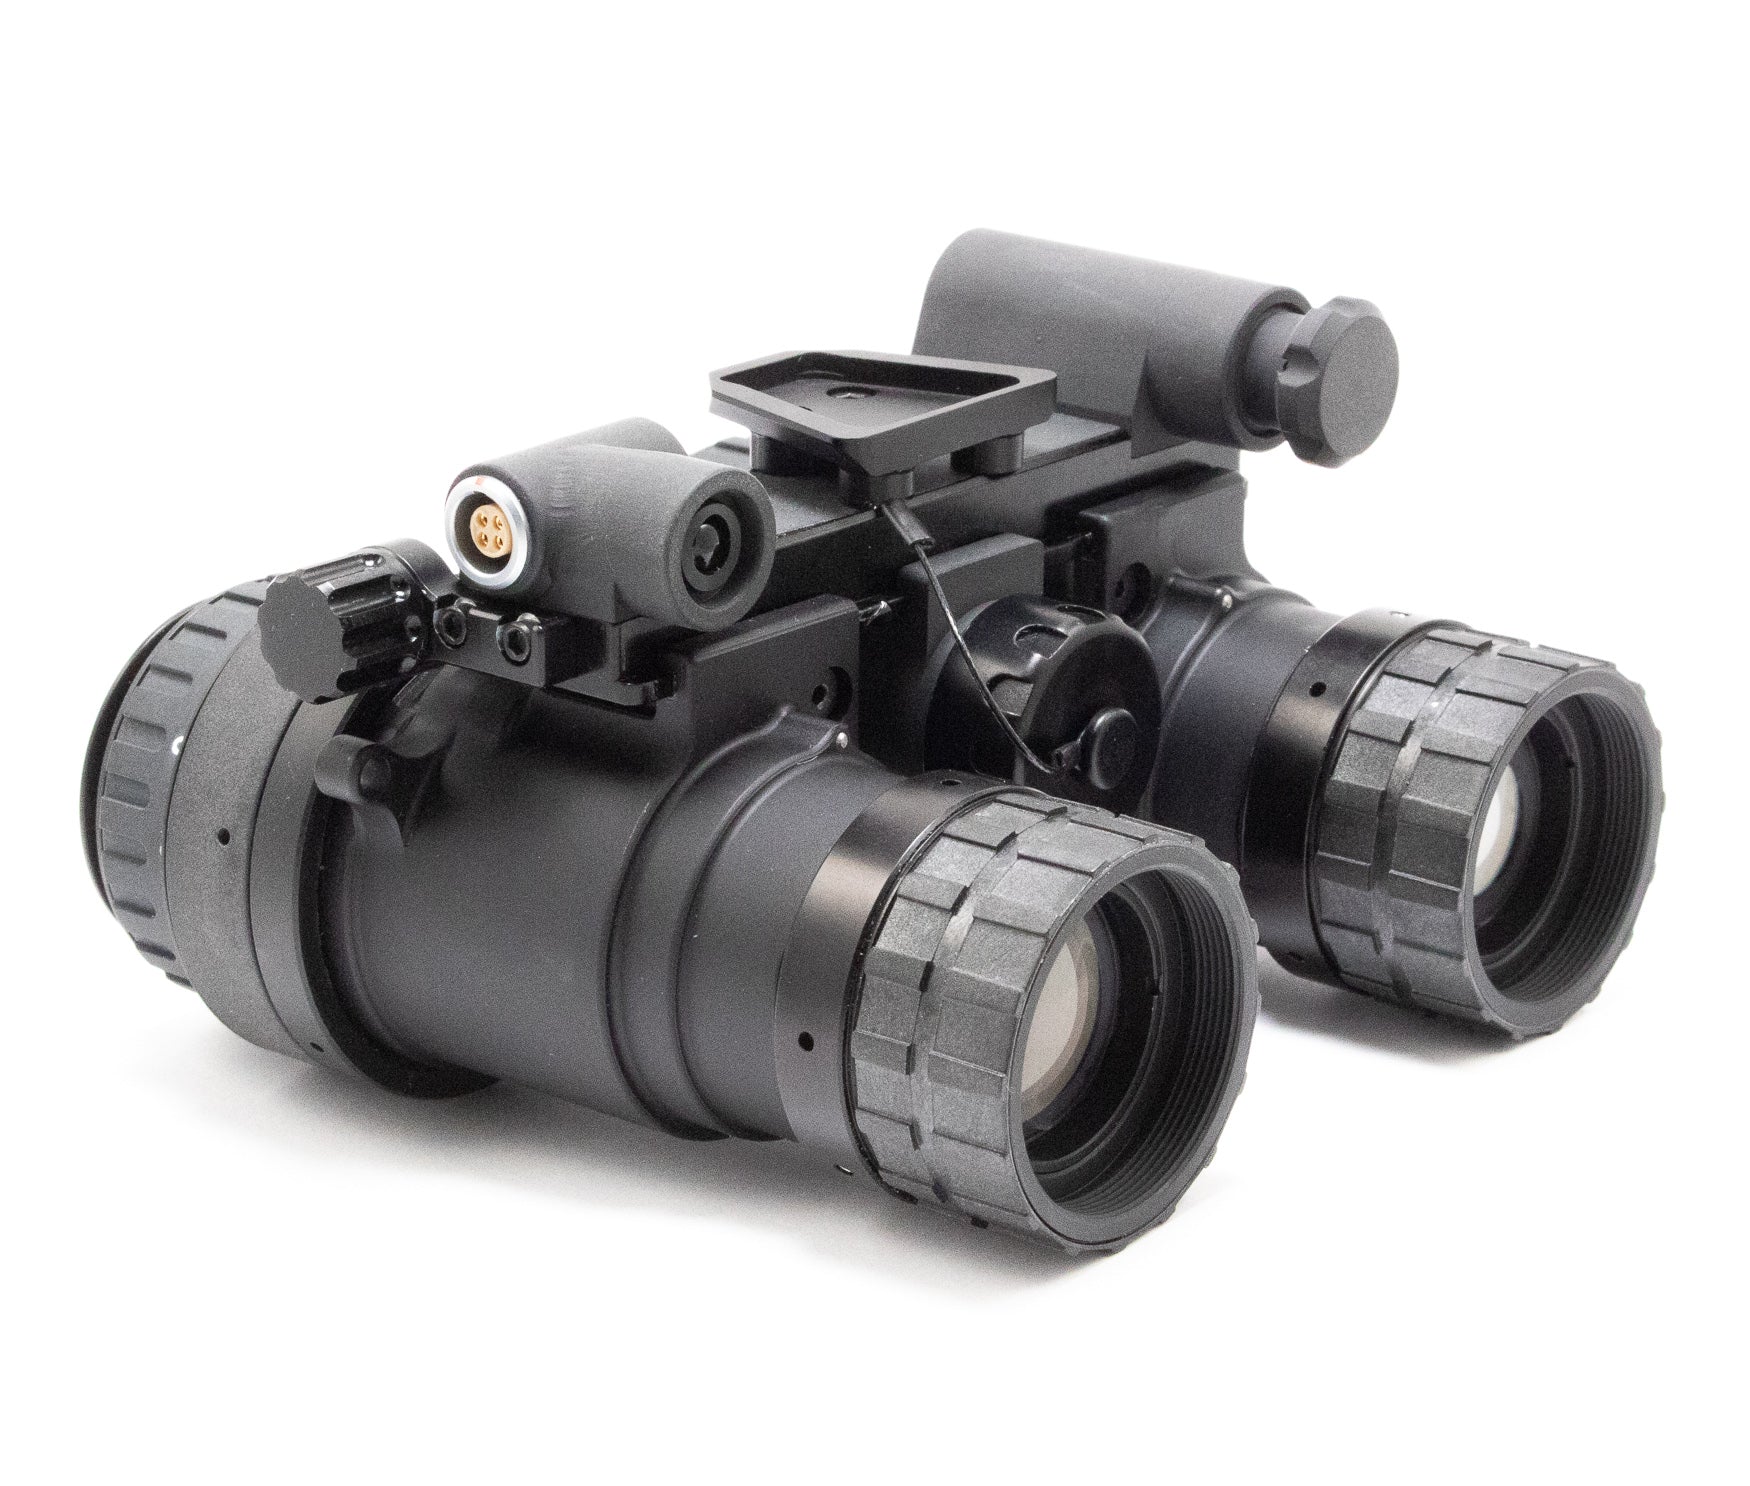 NightOps Tactical Ruggedized Night Vision Goggle (RNVG) - Pew Pew